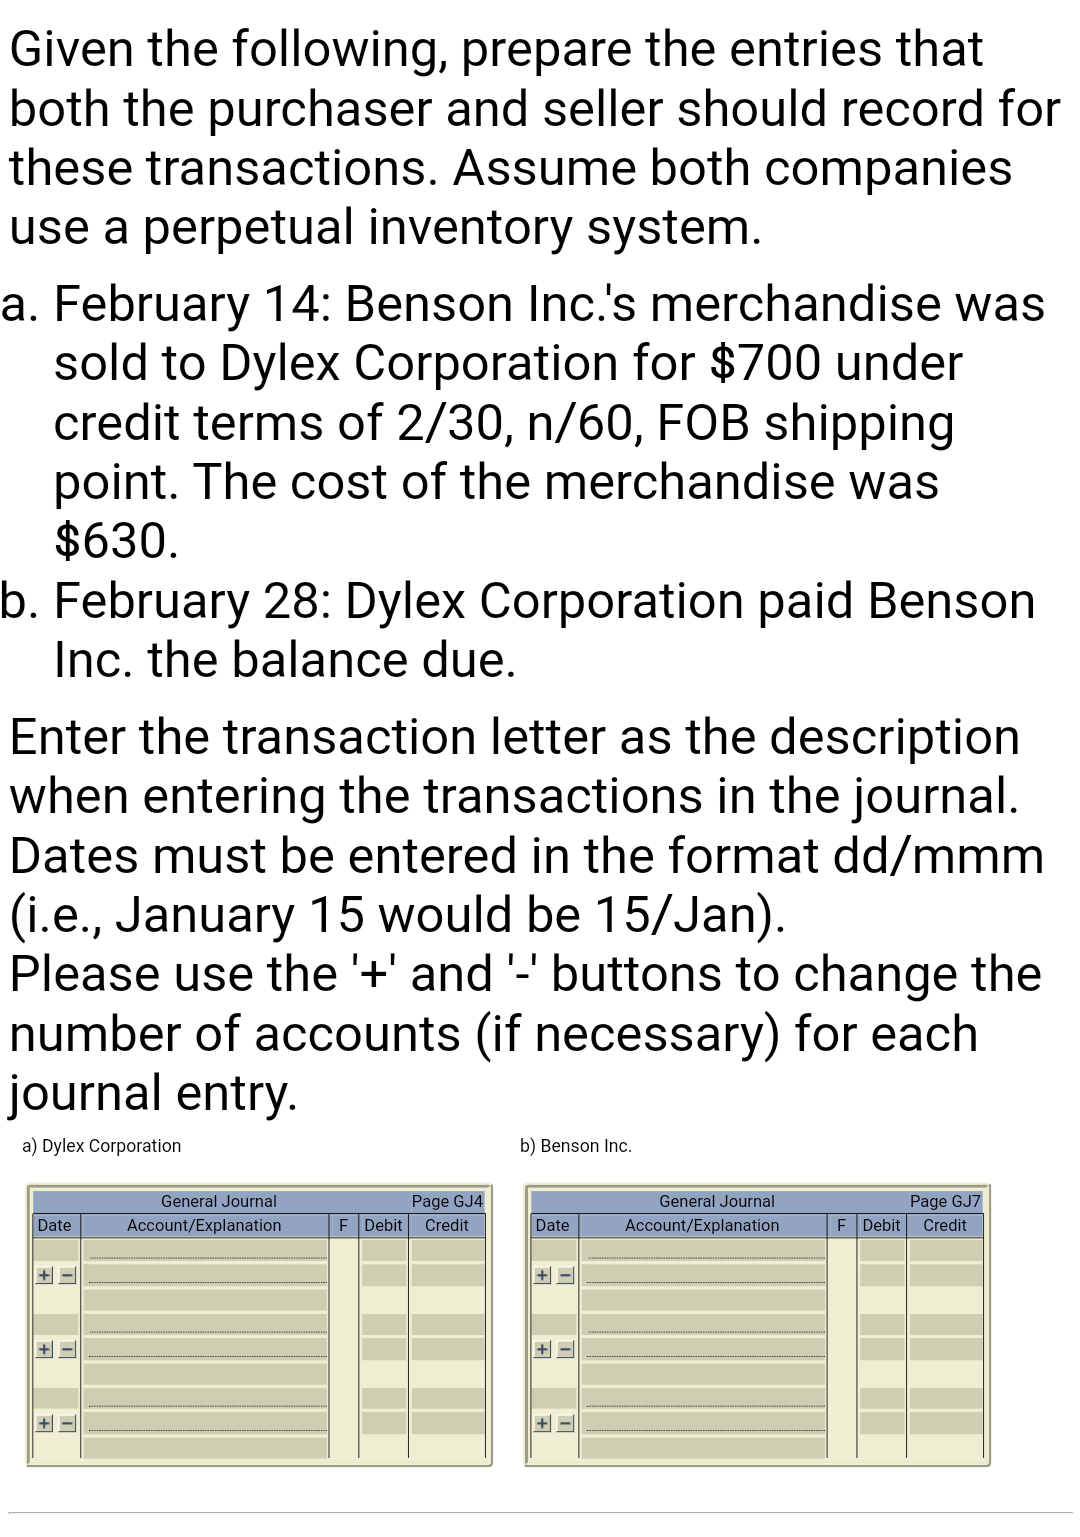 Given the following, prepare the entries that
both the purchaser and seller should record for
these transactions. Assume both companies
use a perpetual inventory system.
a. February 14: Benson Inc.'s merchandise was
sold to Dylex Corporation for $700 under
credit terms of 2/30, n/60, FOB shipping
point. The cost of the merchandise was
$630.
b. February 28: Dylex Corporation paid Benson
Inc. the balance due.
Enter the transaction letter as the description
when entering the transactions in the journal.
Dates must be entered in the format dd/mmm
(i.e., January 15 would be 15/Jan).
Please use the '+' and '-' buttons to change the
number of accounts (if necessary) for each
journal entry.
a) Dylex Corporation
b) Benson Inc.
General Journal
Page GJ4
General Journal
Page GJ7
Date
Account/Explanation
E Debit
Credit
Date
Account/Explanation
E Debit
Credit
+ -
+ -
+ -|
+
